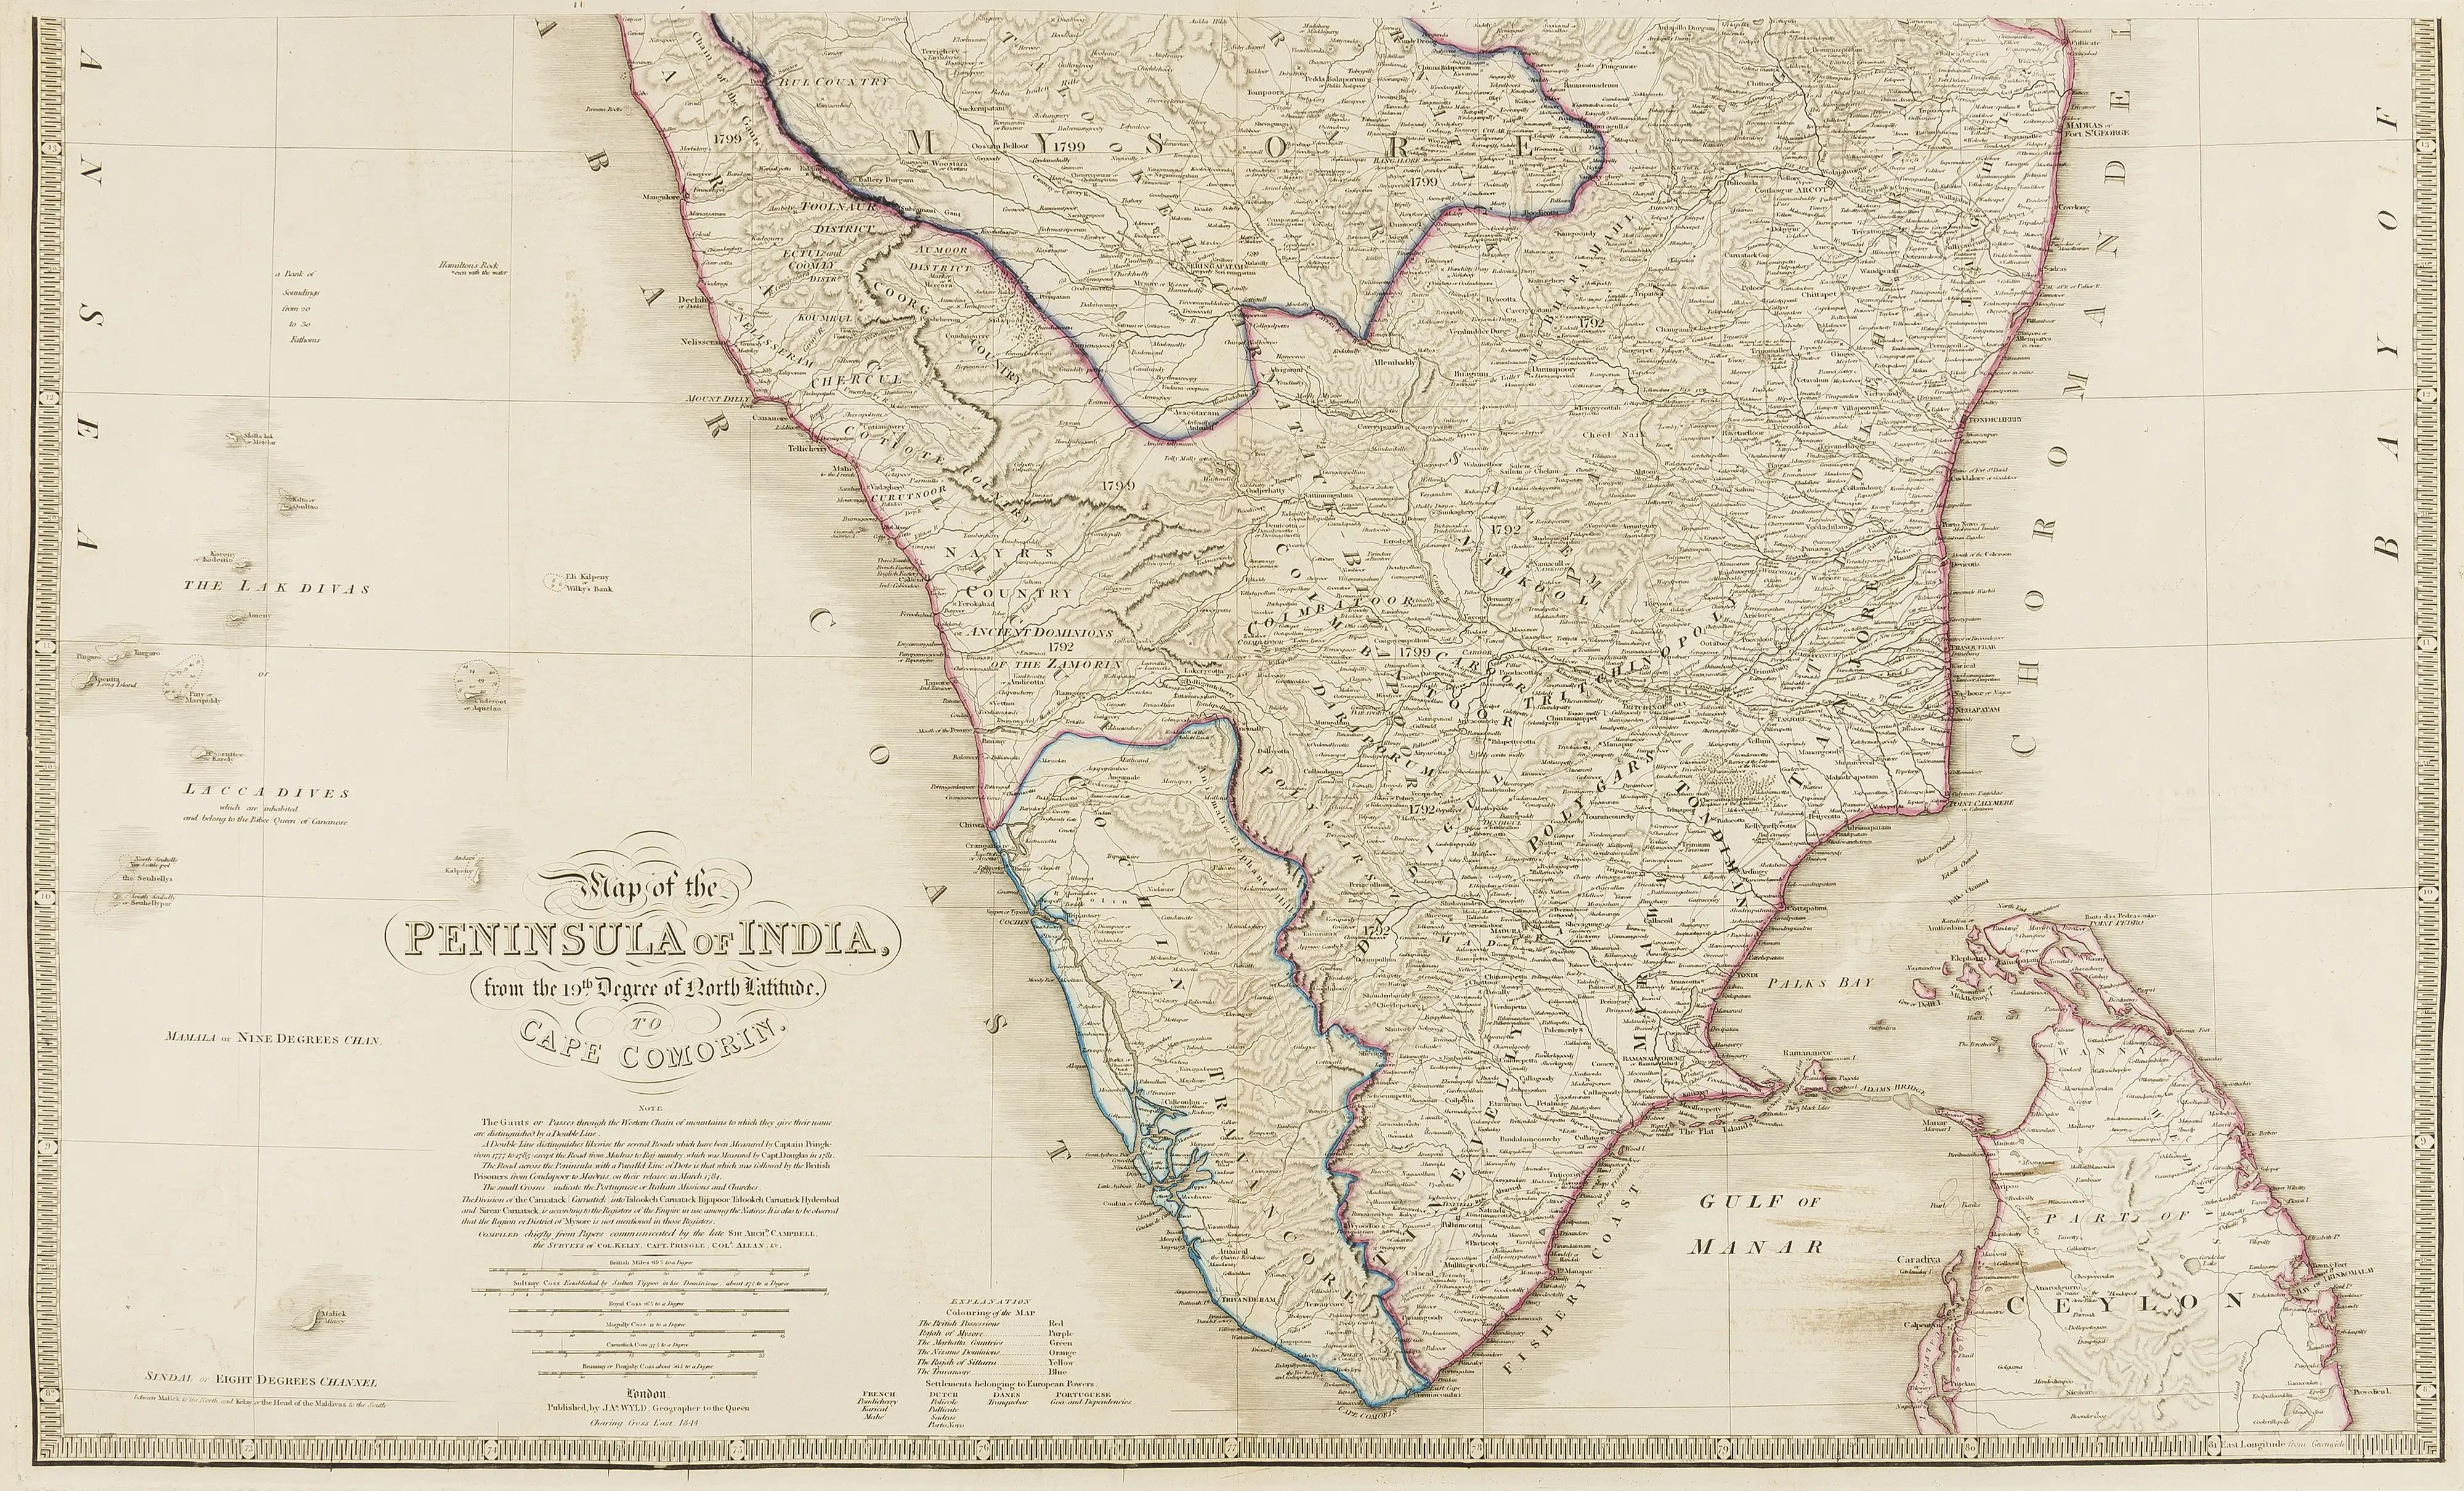 This extensive map of India, spanning two sheets, draws from Reynell’s original map and incorporates data provided by Sir Archibald Campbell, as well as surveys conducted by Colonel Pringle and Colonel Allan. It features a comprehensive list of